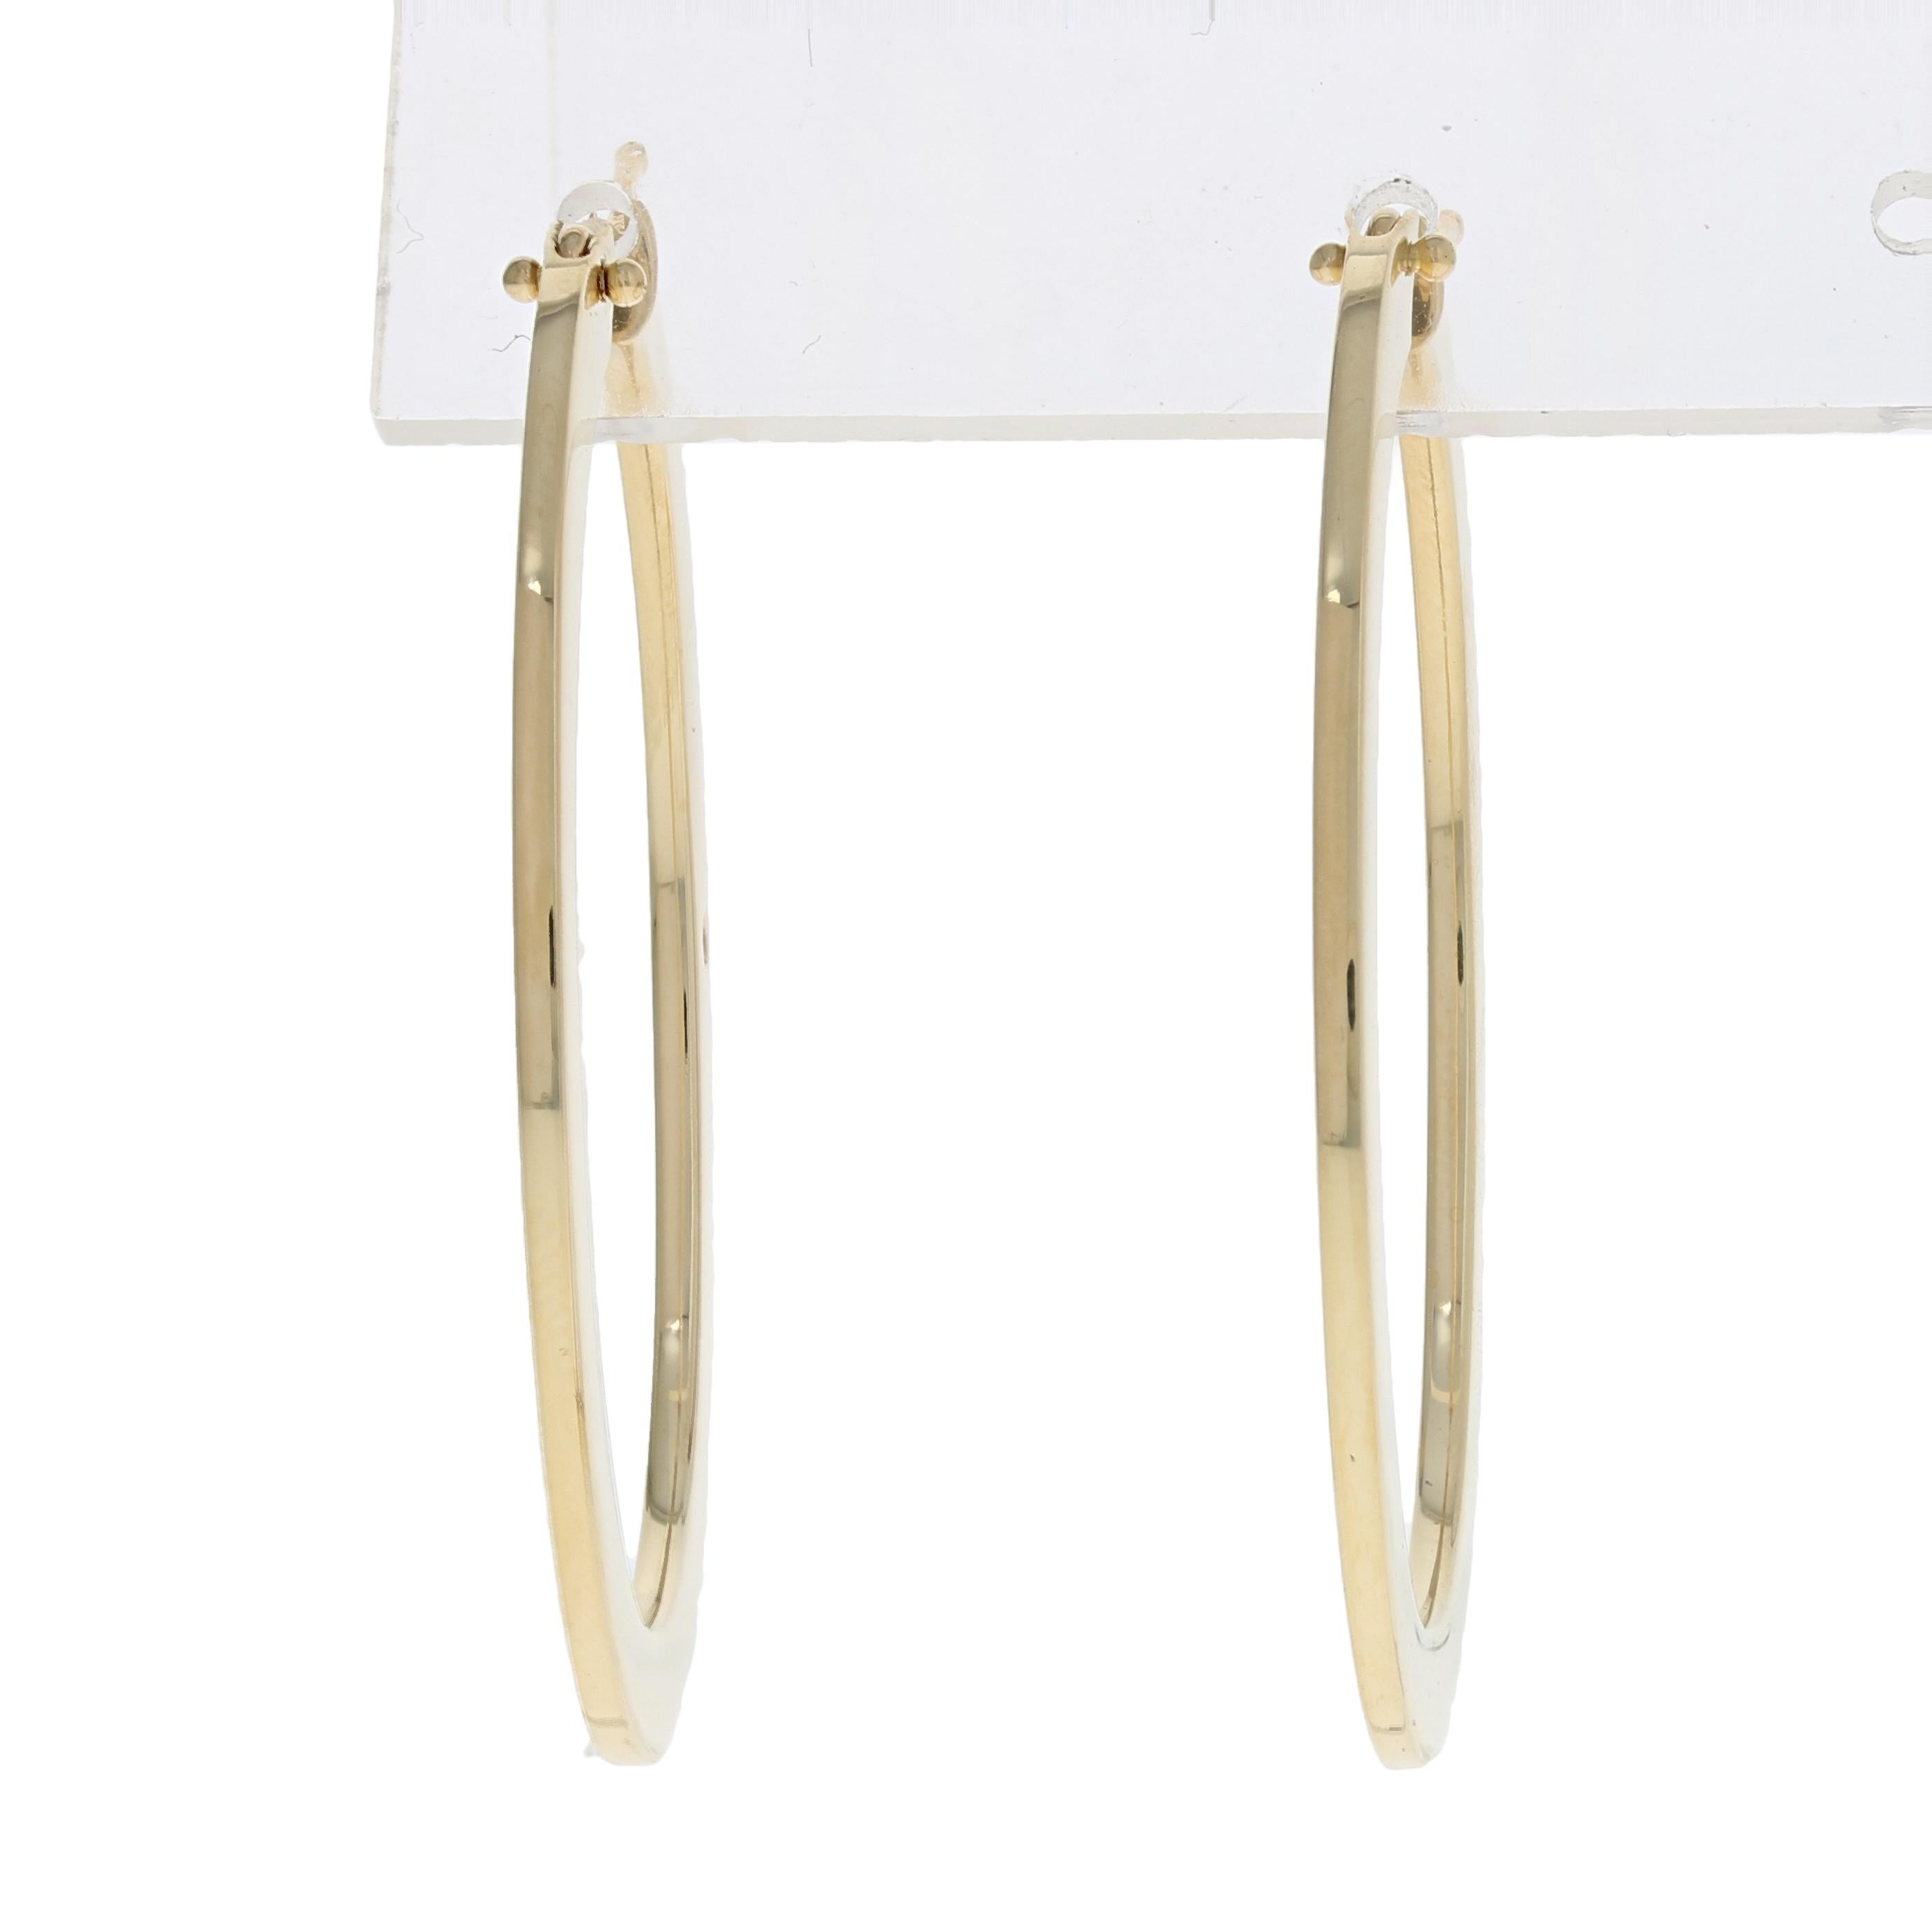 Originally retailing for $1200, these chic designer hoops are being offered here for a much more wallet-friendly price. 

Brand: Roberto Coin

Country of Origin: Italy
Metal Content: Guaranteed 18k Gold as stamped

Stone Information: 
Synthetic